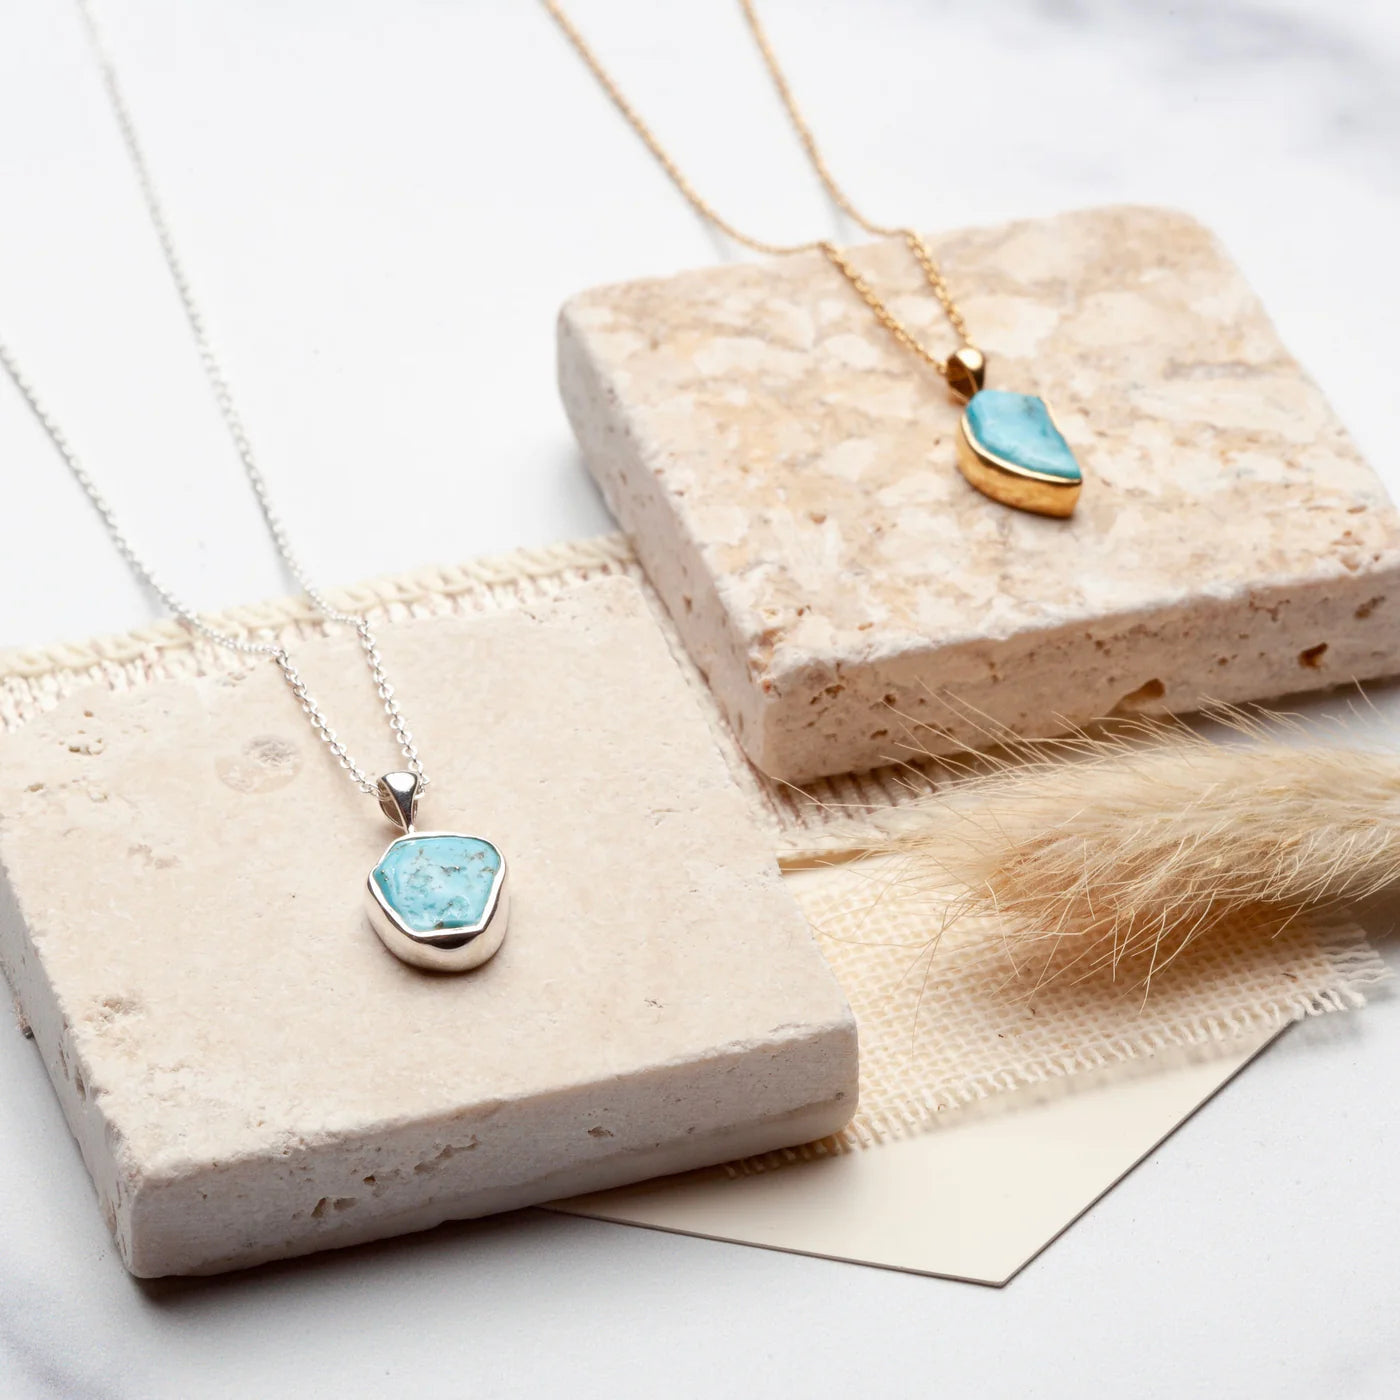 Zuri Necklace with Turquoise